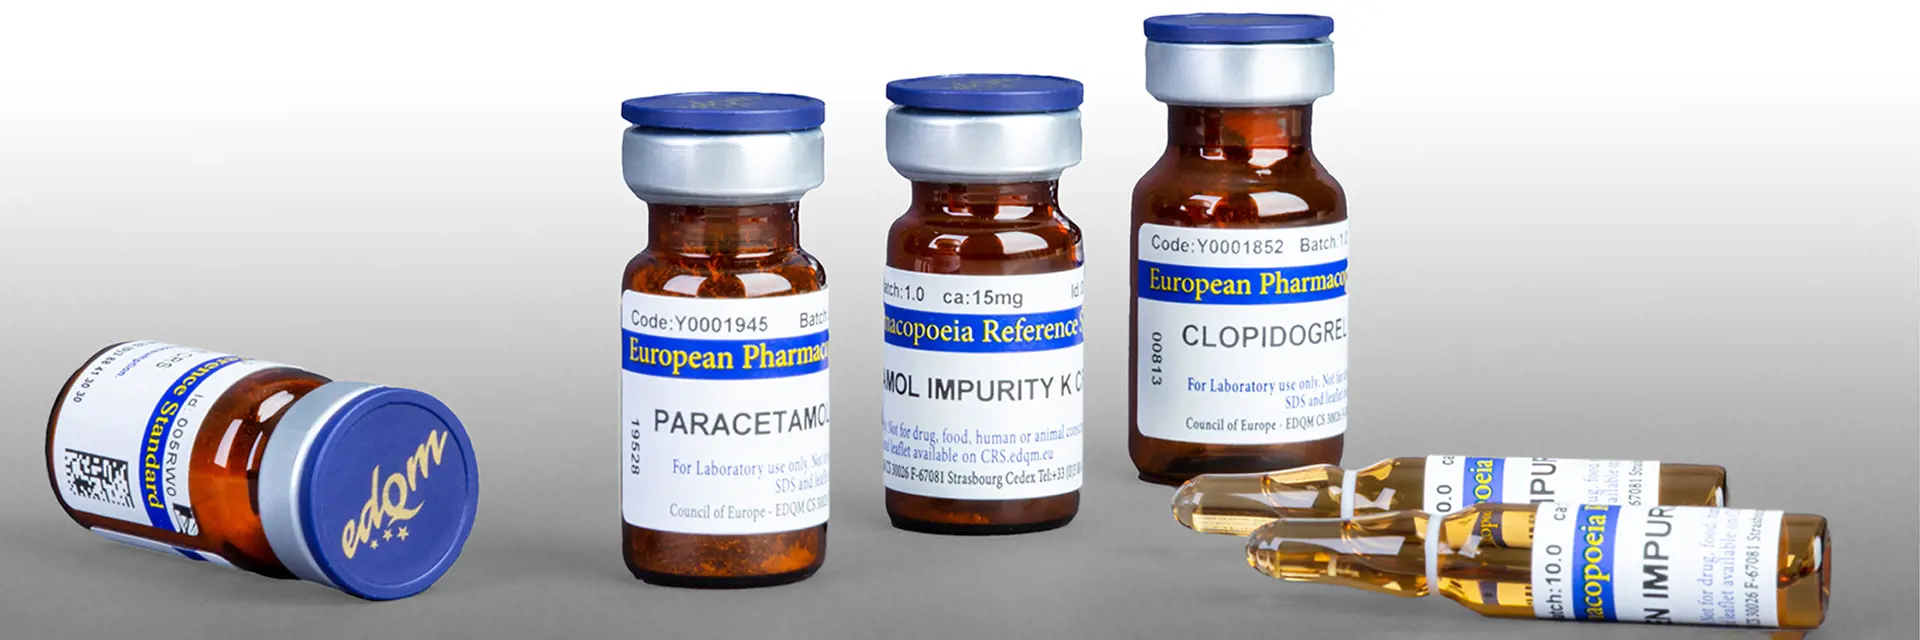 Vials and ampoules containing primary reference standards from the European Pharmacopoeia